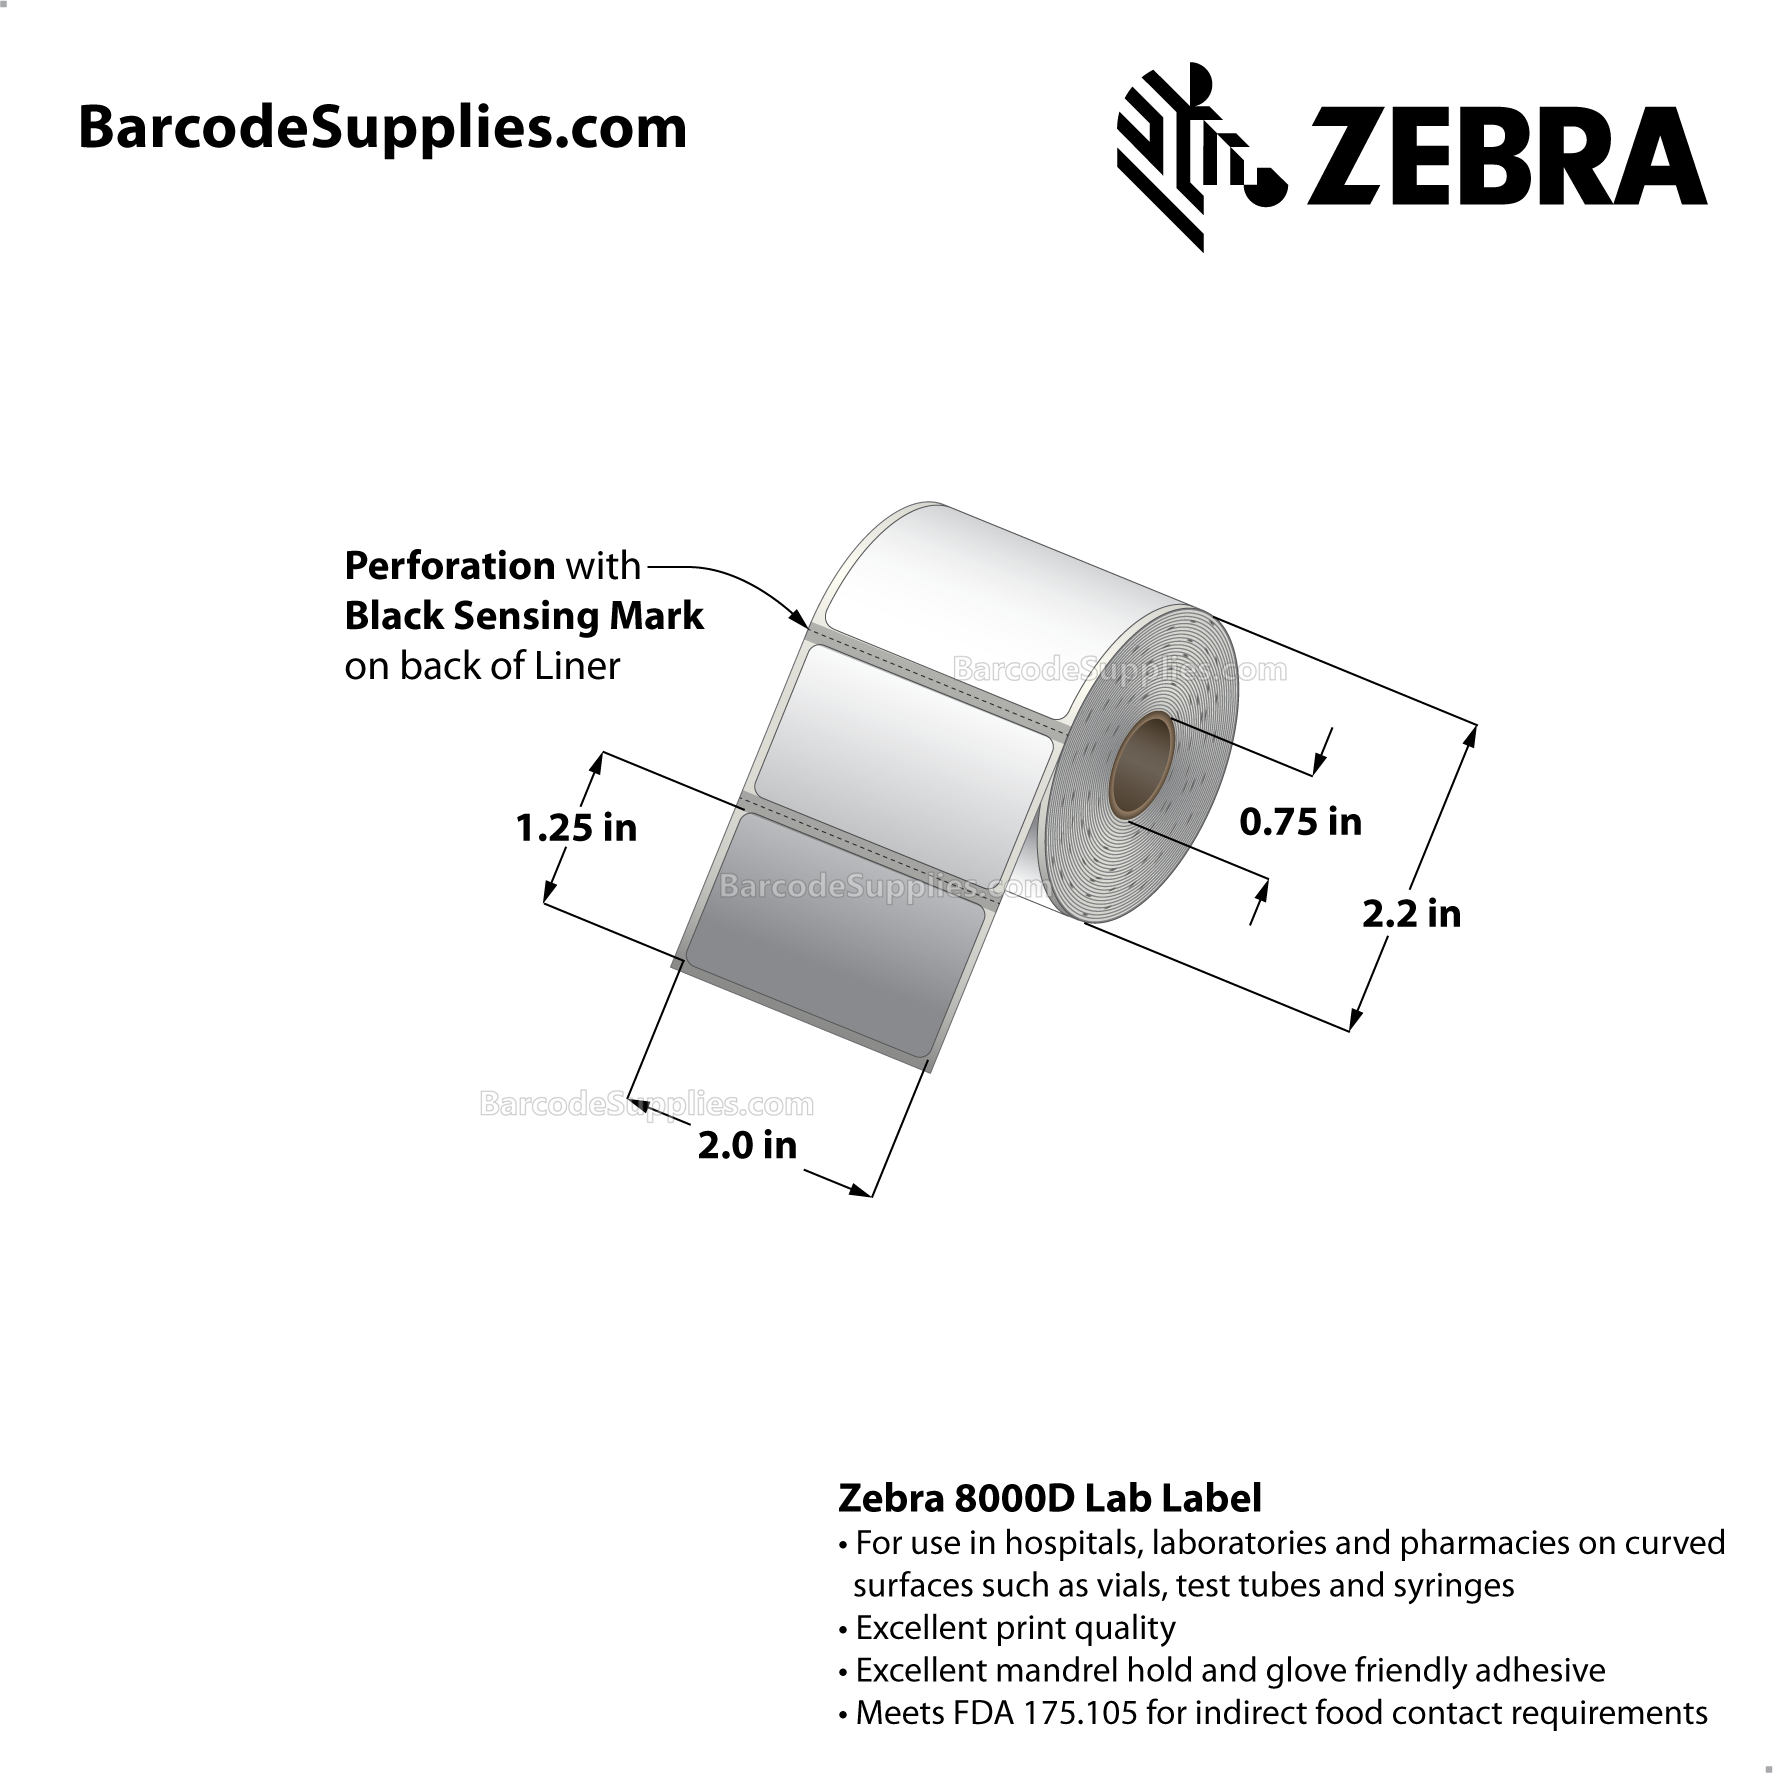 2 x 1.25 Direct Thermal White 8000D Lab Labels With Permanent Adhesive - Black mark sensing - Mobile specimen collection label for Cerner, McKesson, Siemens. - Perforated - 330 Labels Per Roll - Carton Of 12 Rolls - 3960 Labels Total - MPN: 10017573